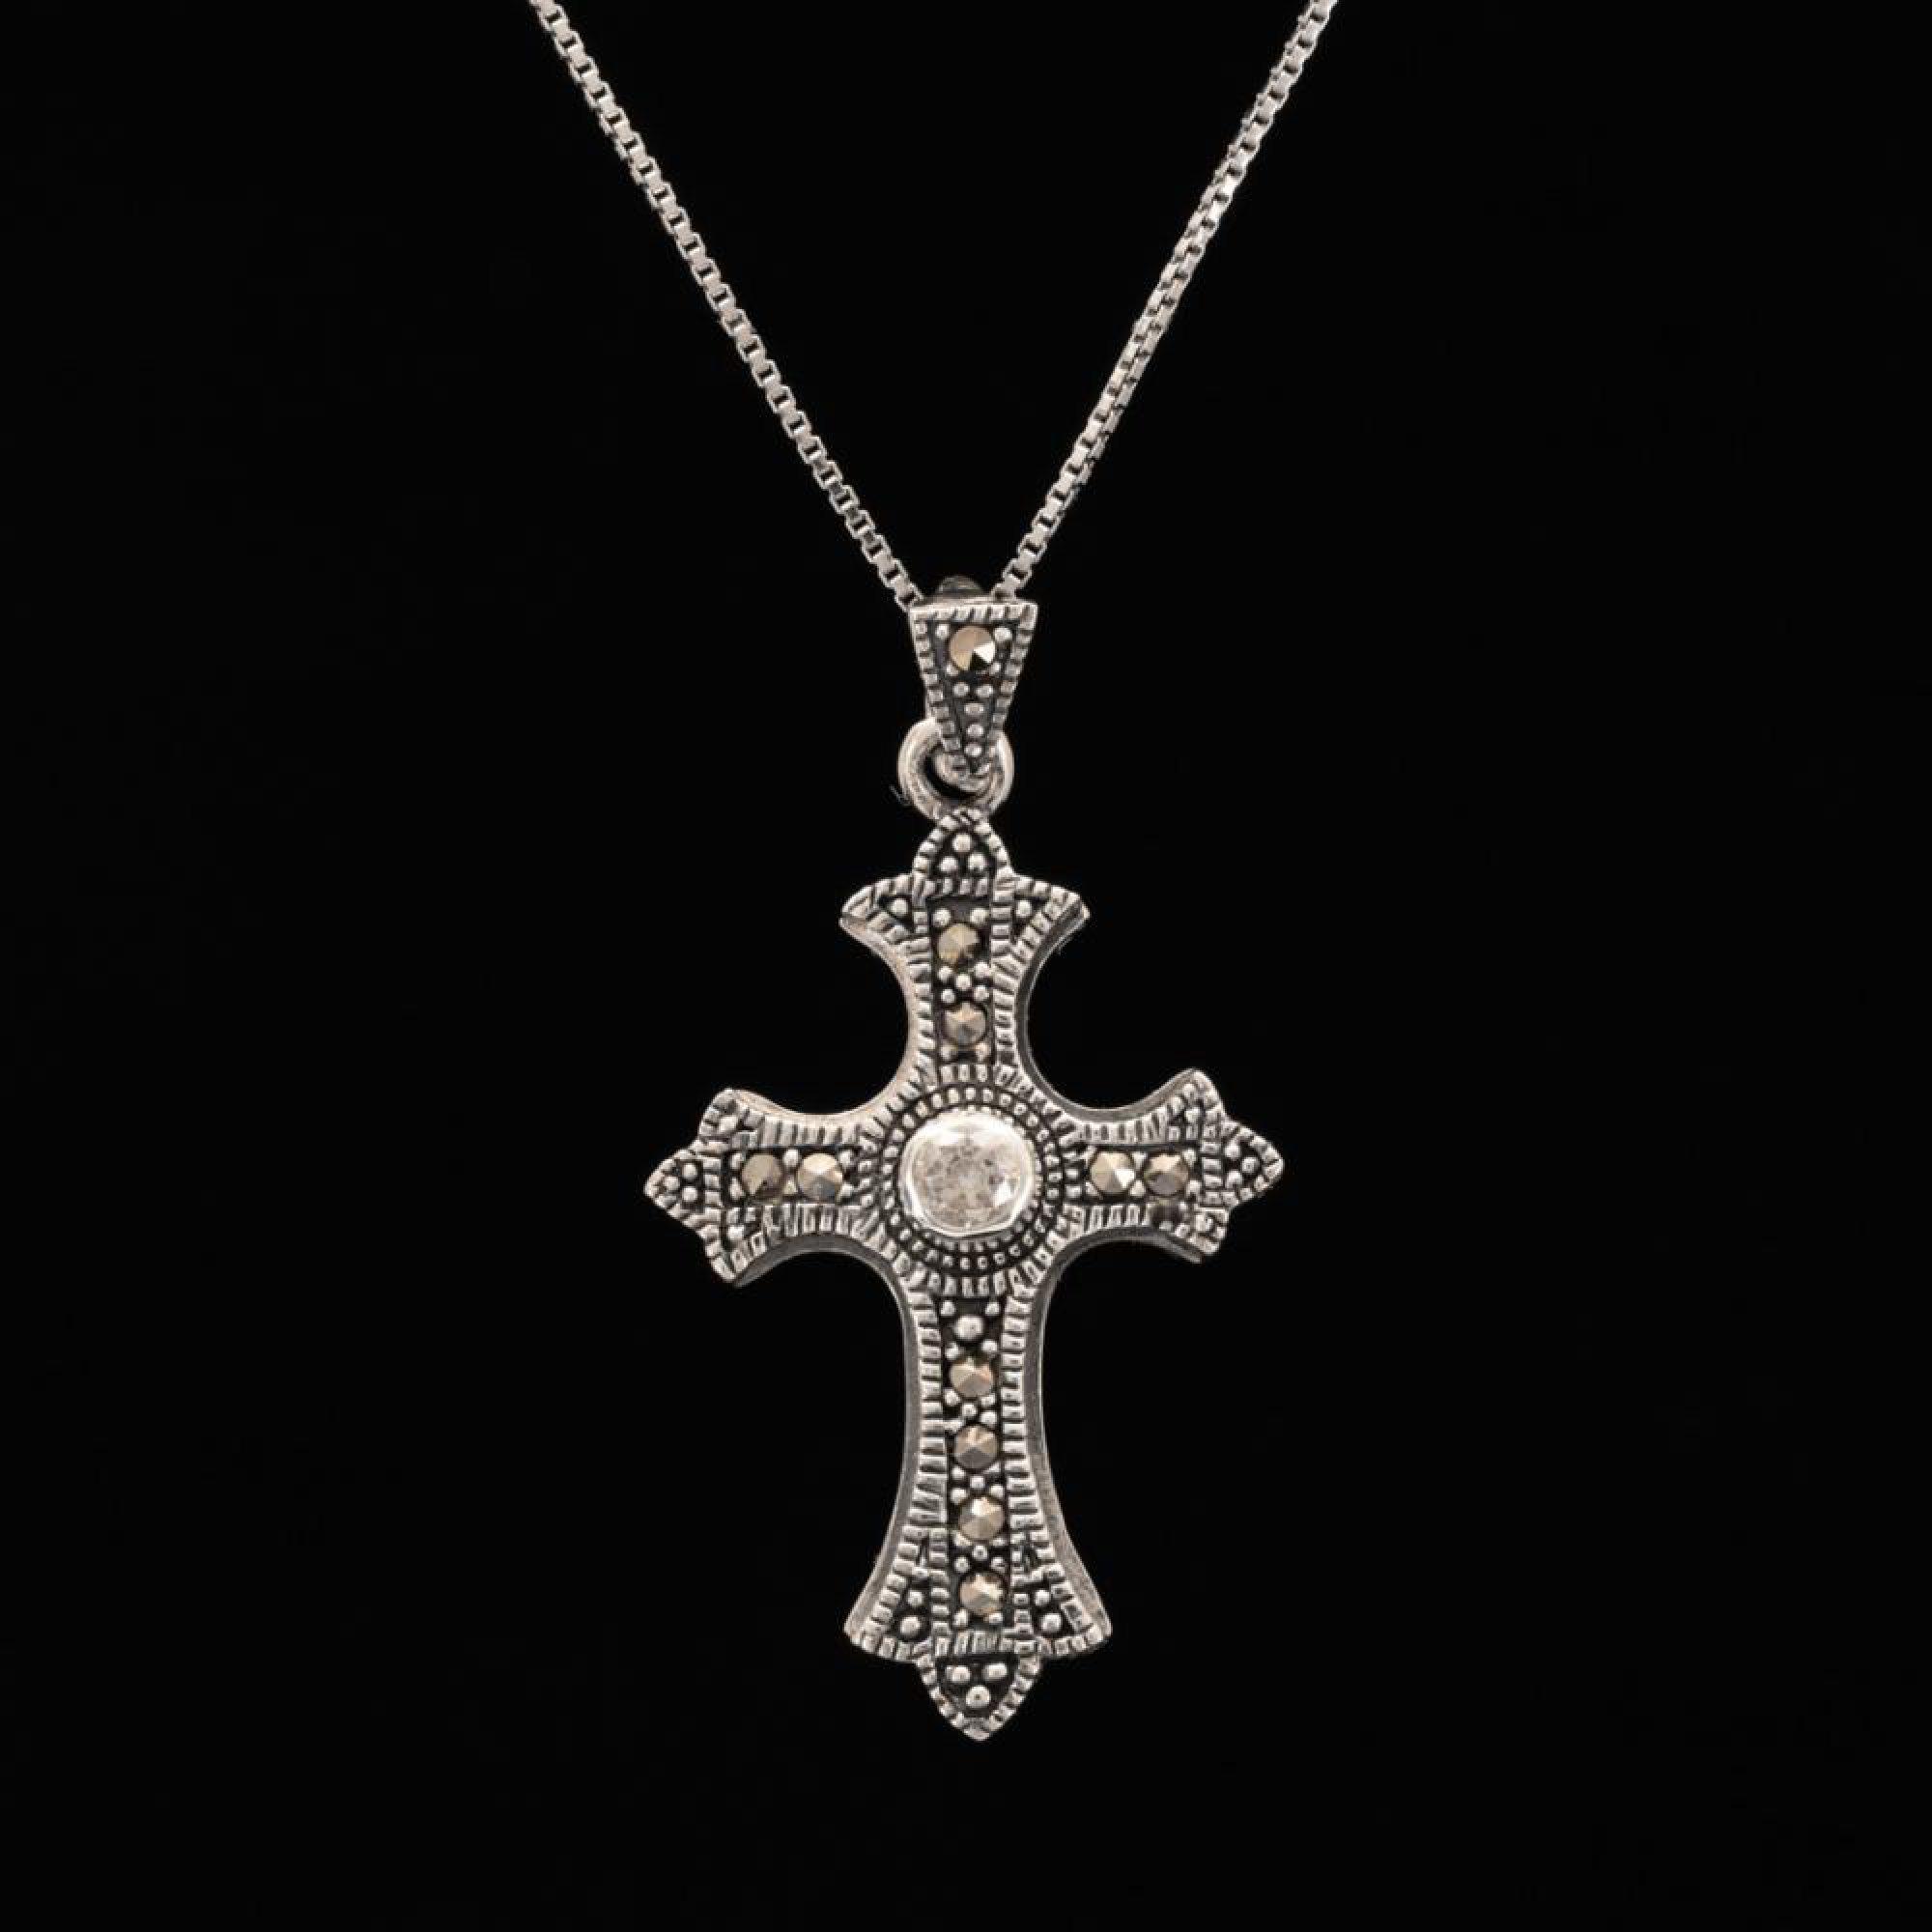 Silver cross with zircon stone and marcasites